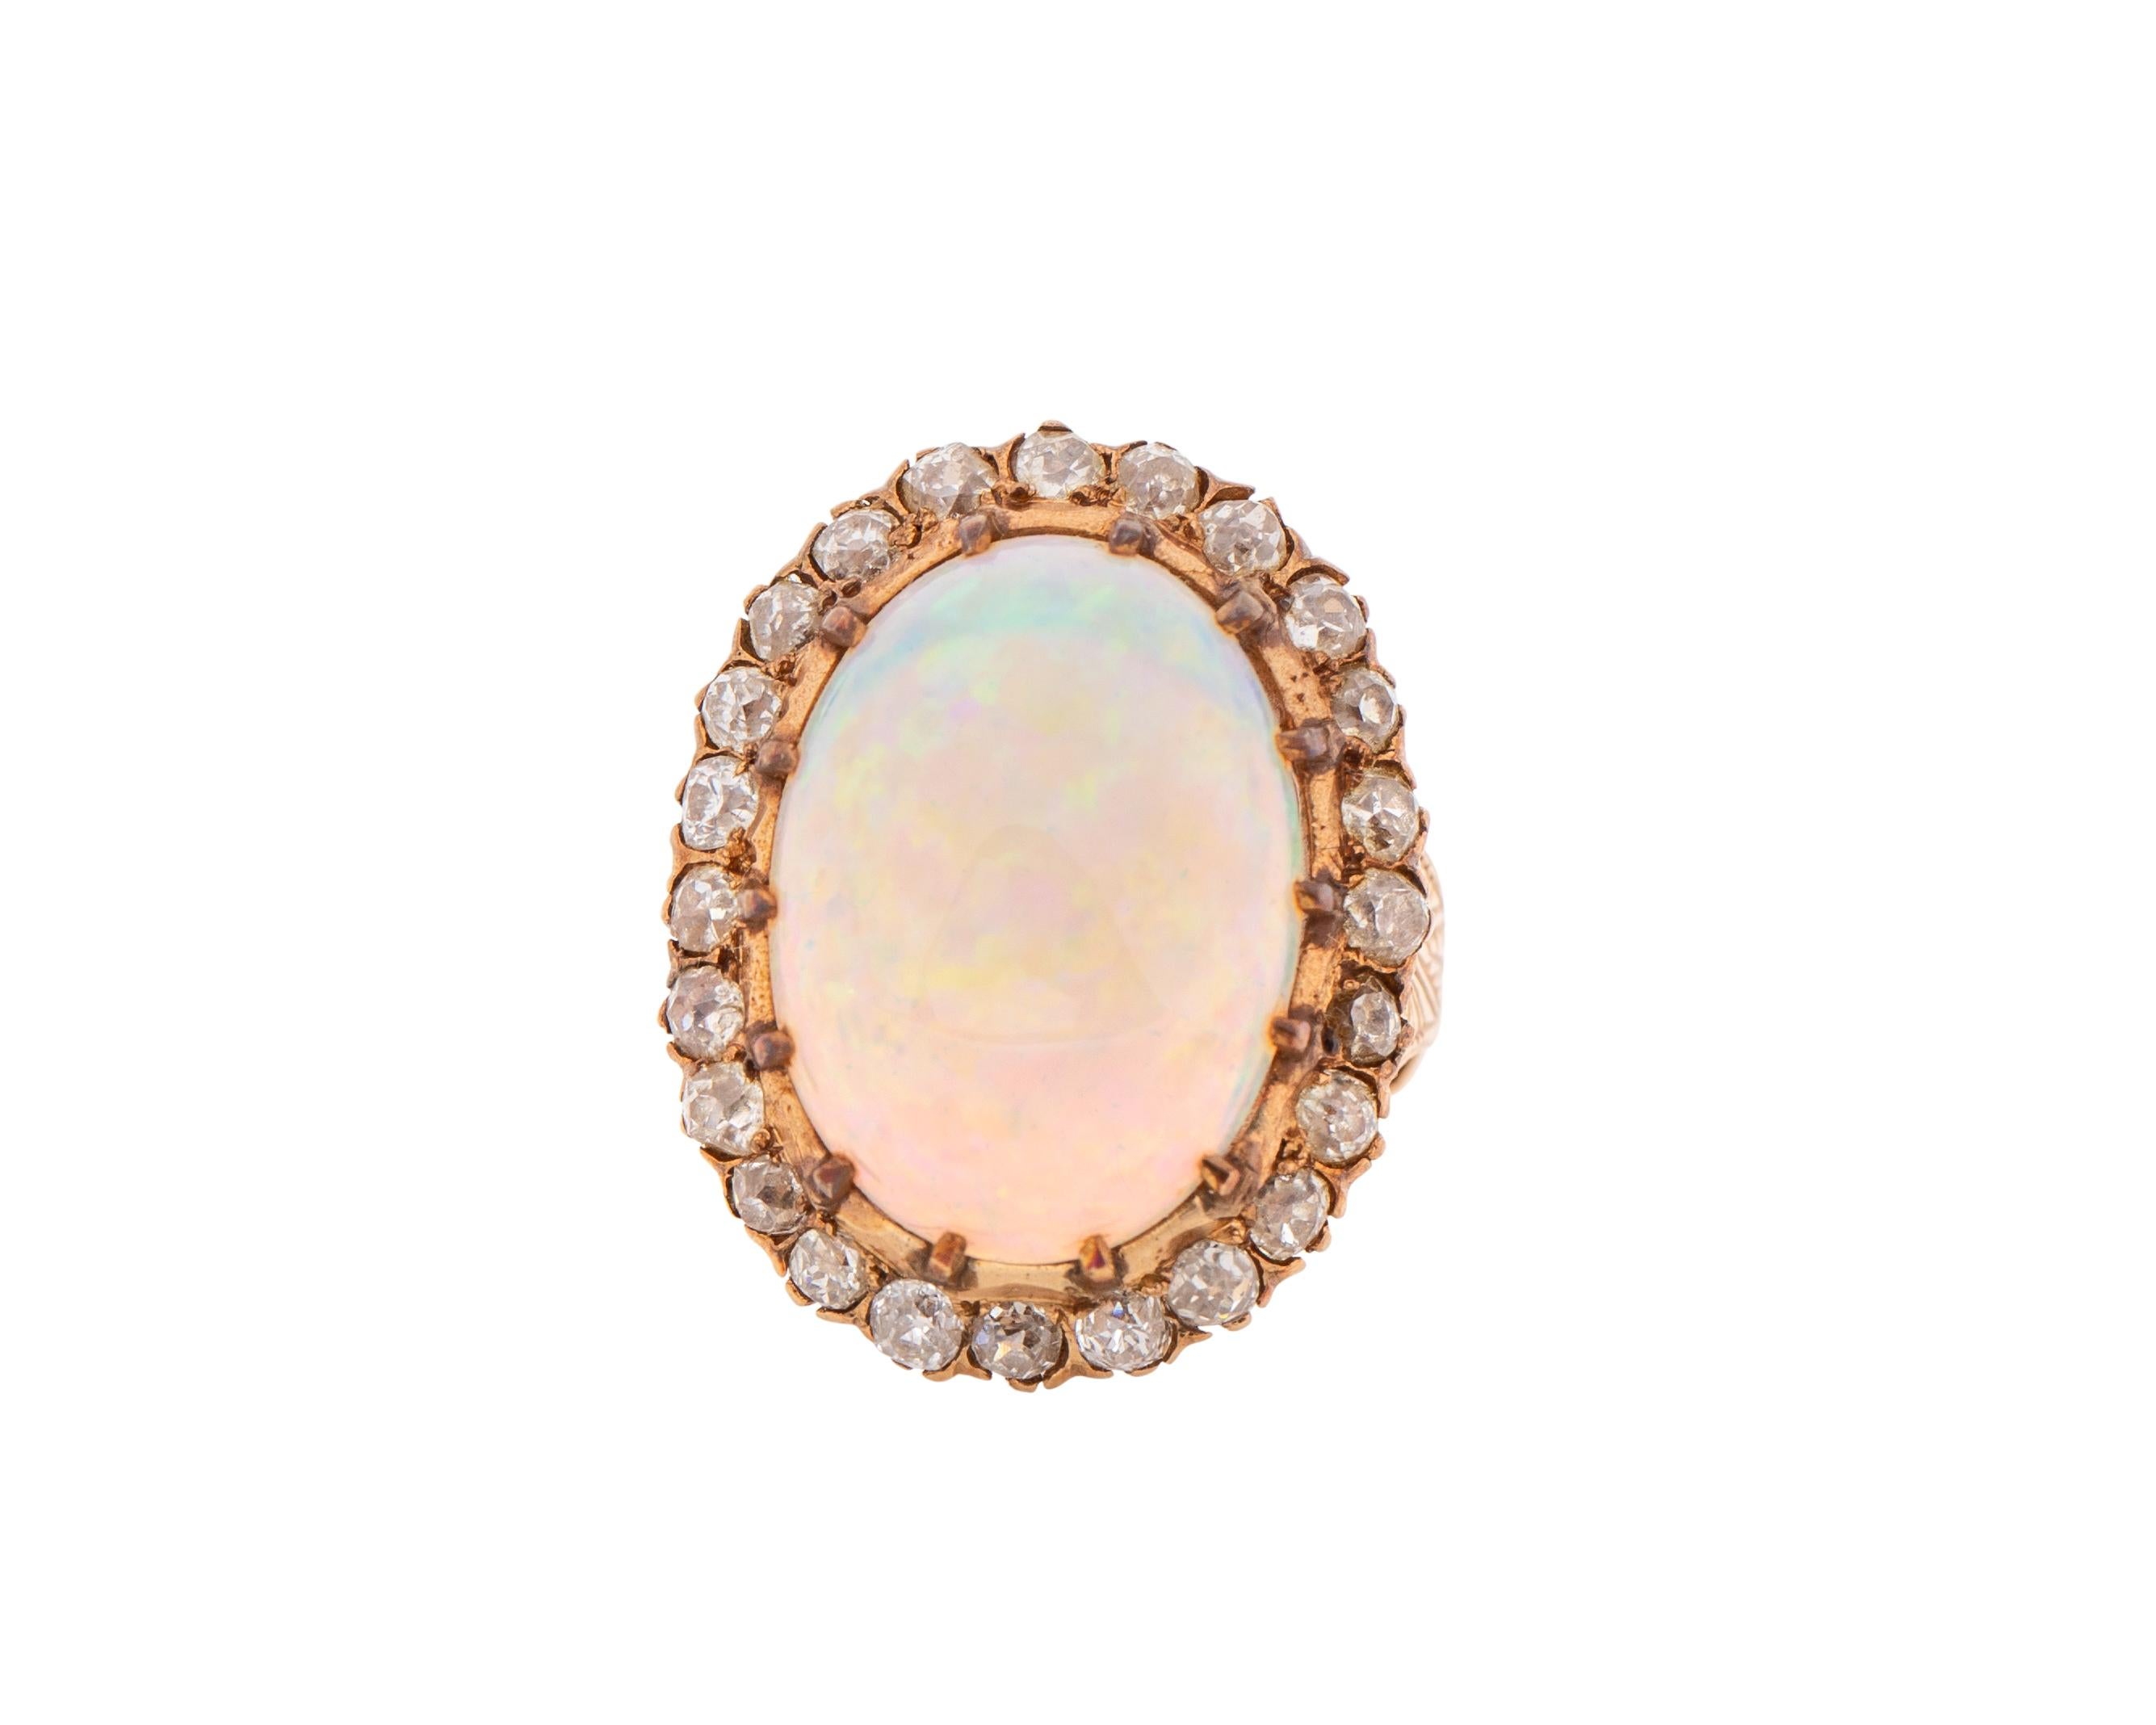 Item Details:
Metal type: 14 Karat Yellow Gold
Weight: 11.83 grams
Size: 6

Opal Details:
Cut: Cabochon 
Carat: 15 Carats

Diamond Details:
Cut: Old Miners
Carat: 1.5 Carat Total weight 
Color: G-J
Clarity: VS-I1

About the ring:
Stunning art deco